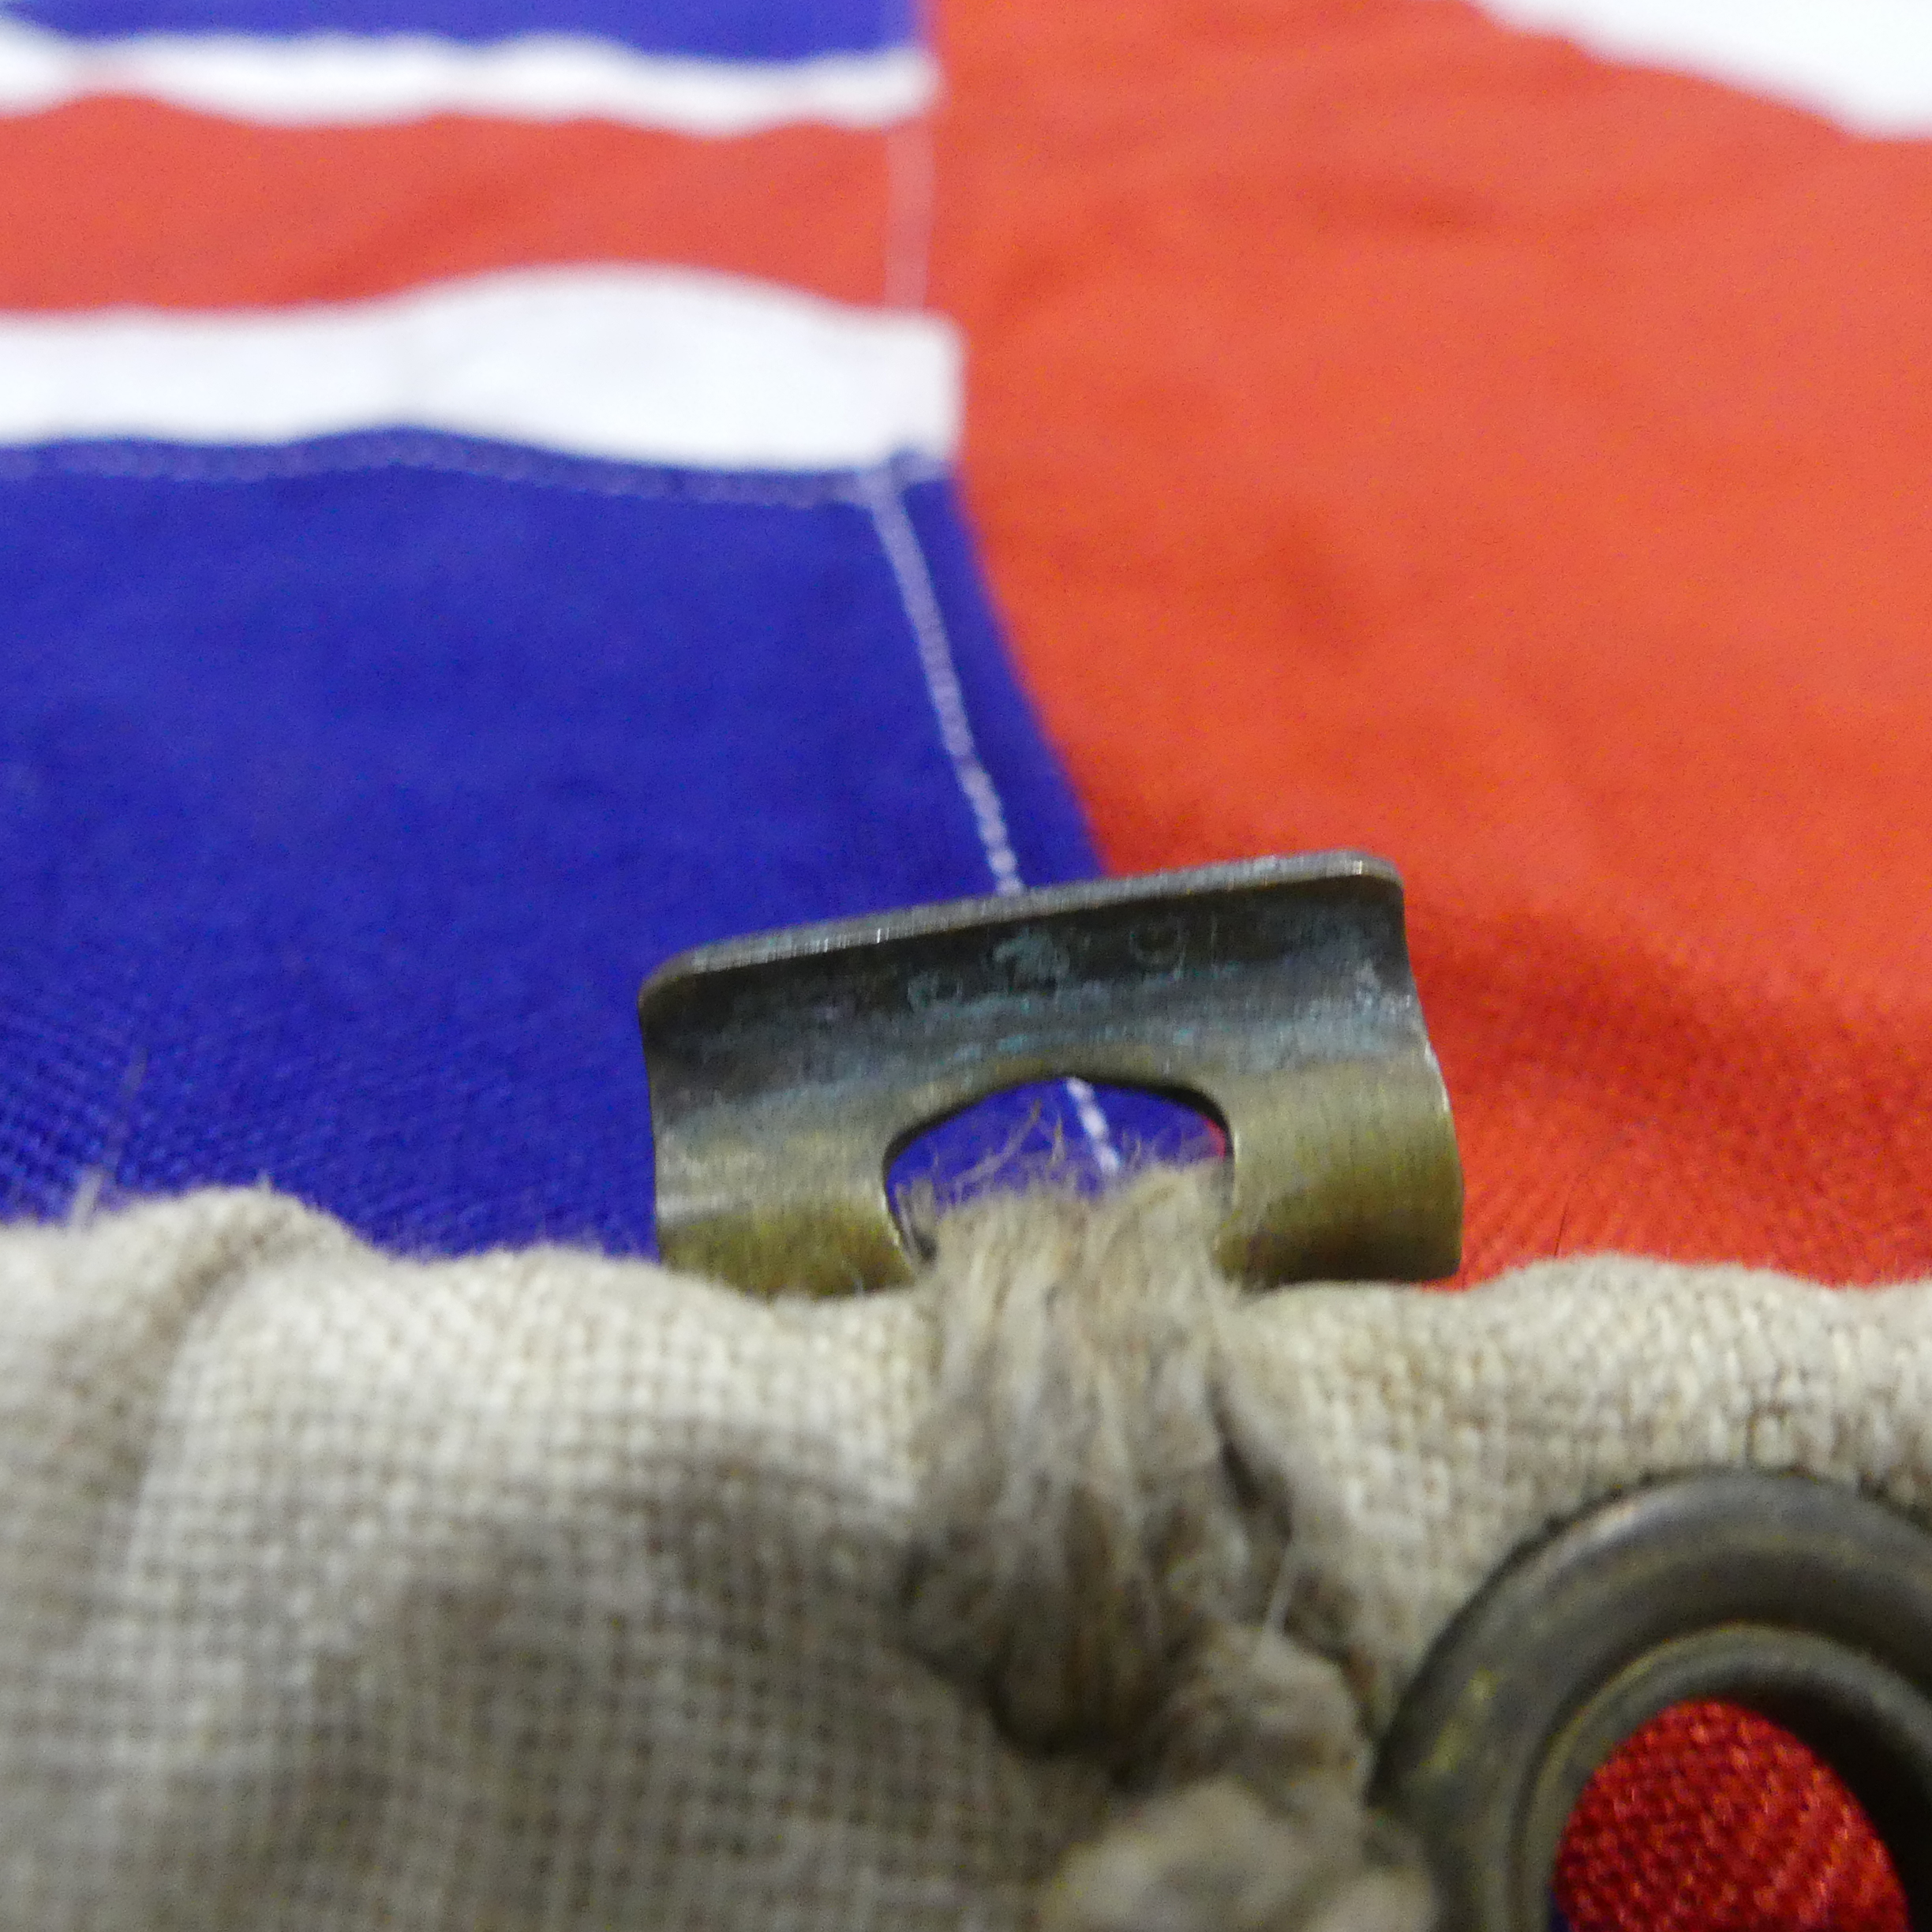 A WWII period British Royal Navy white ensign ship's Flag, with rope and metal attachments - Image 6 of 7